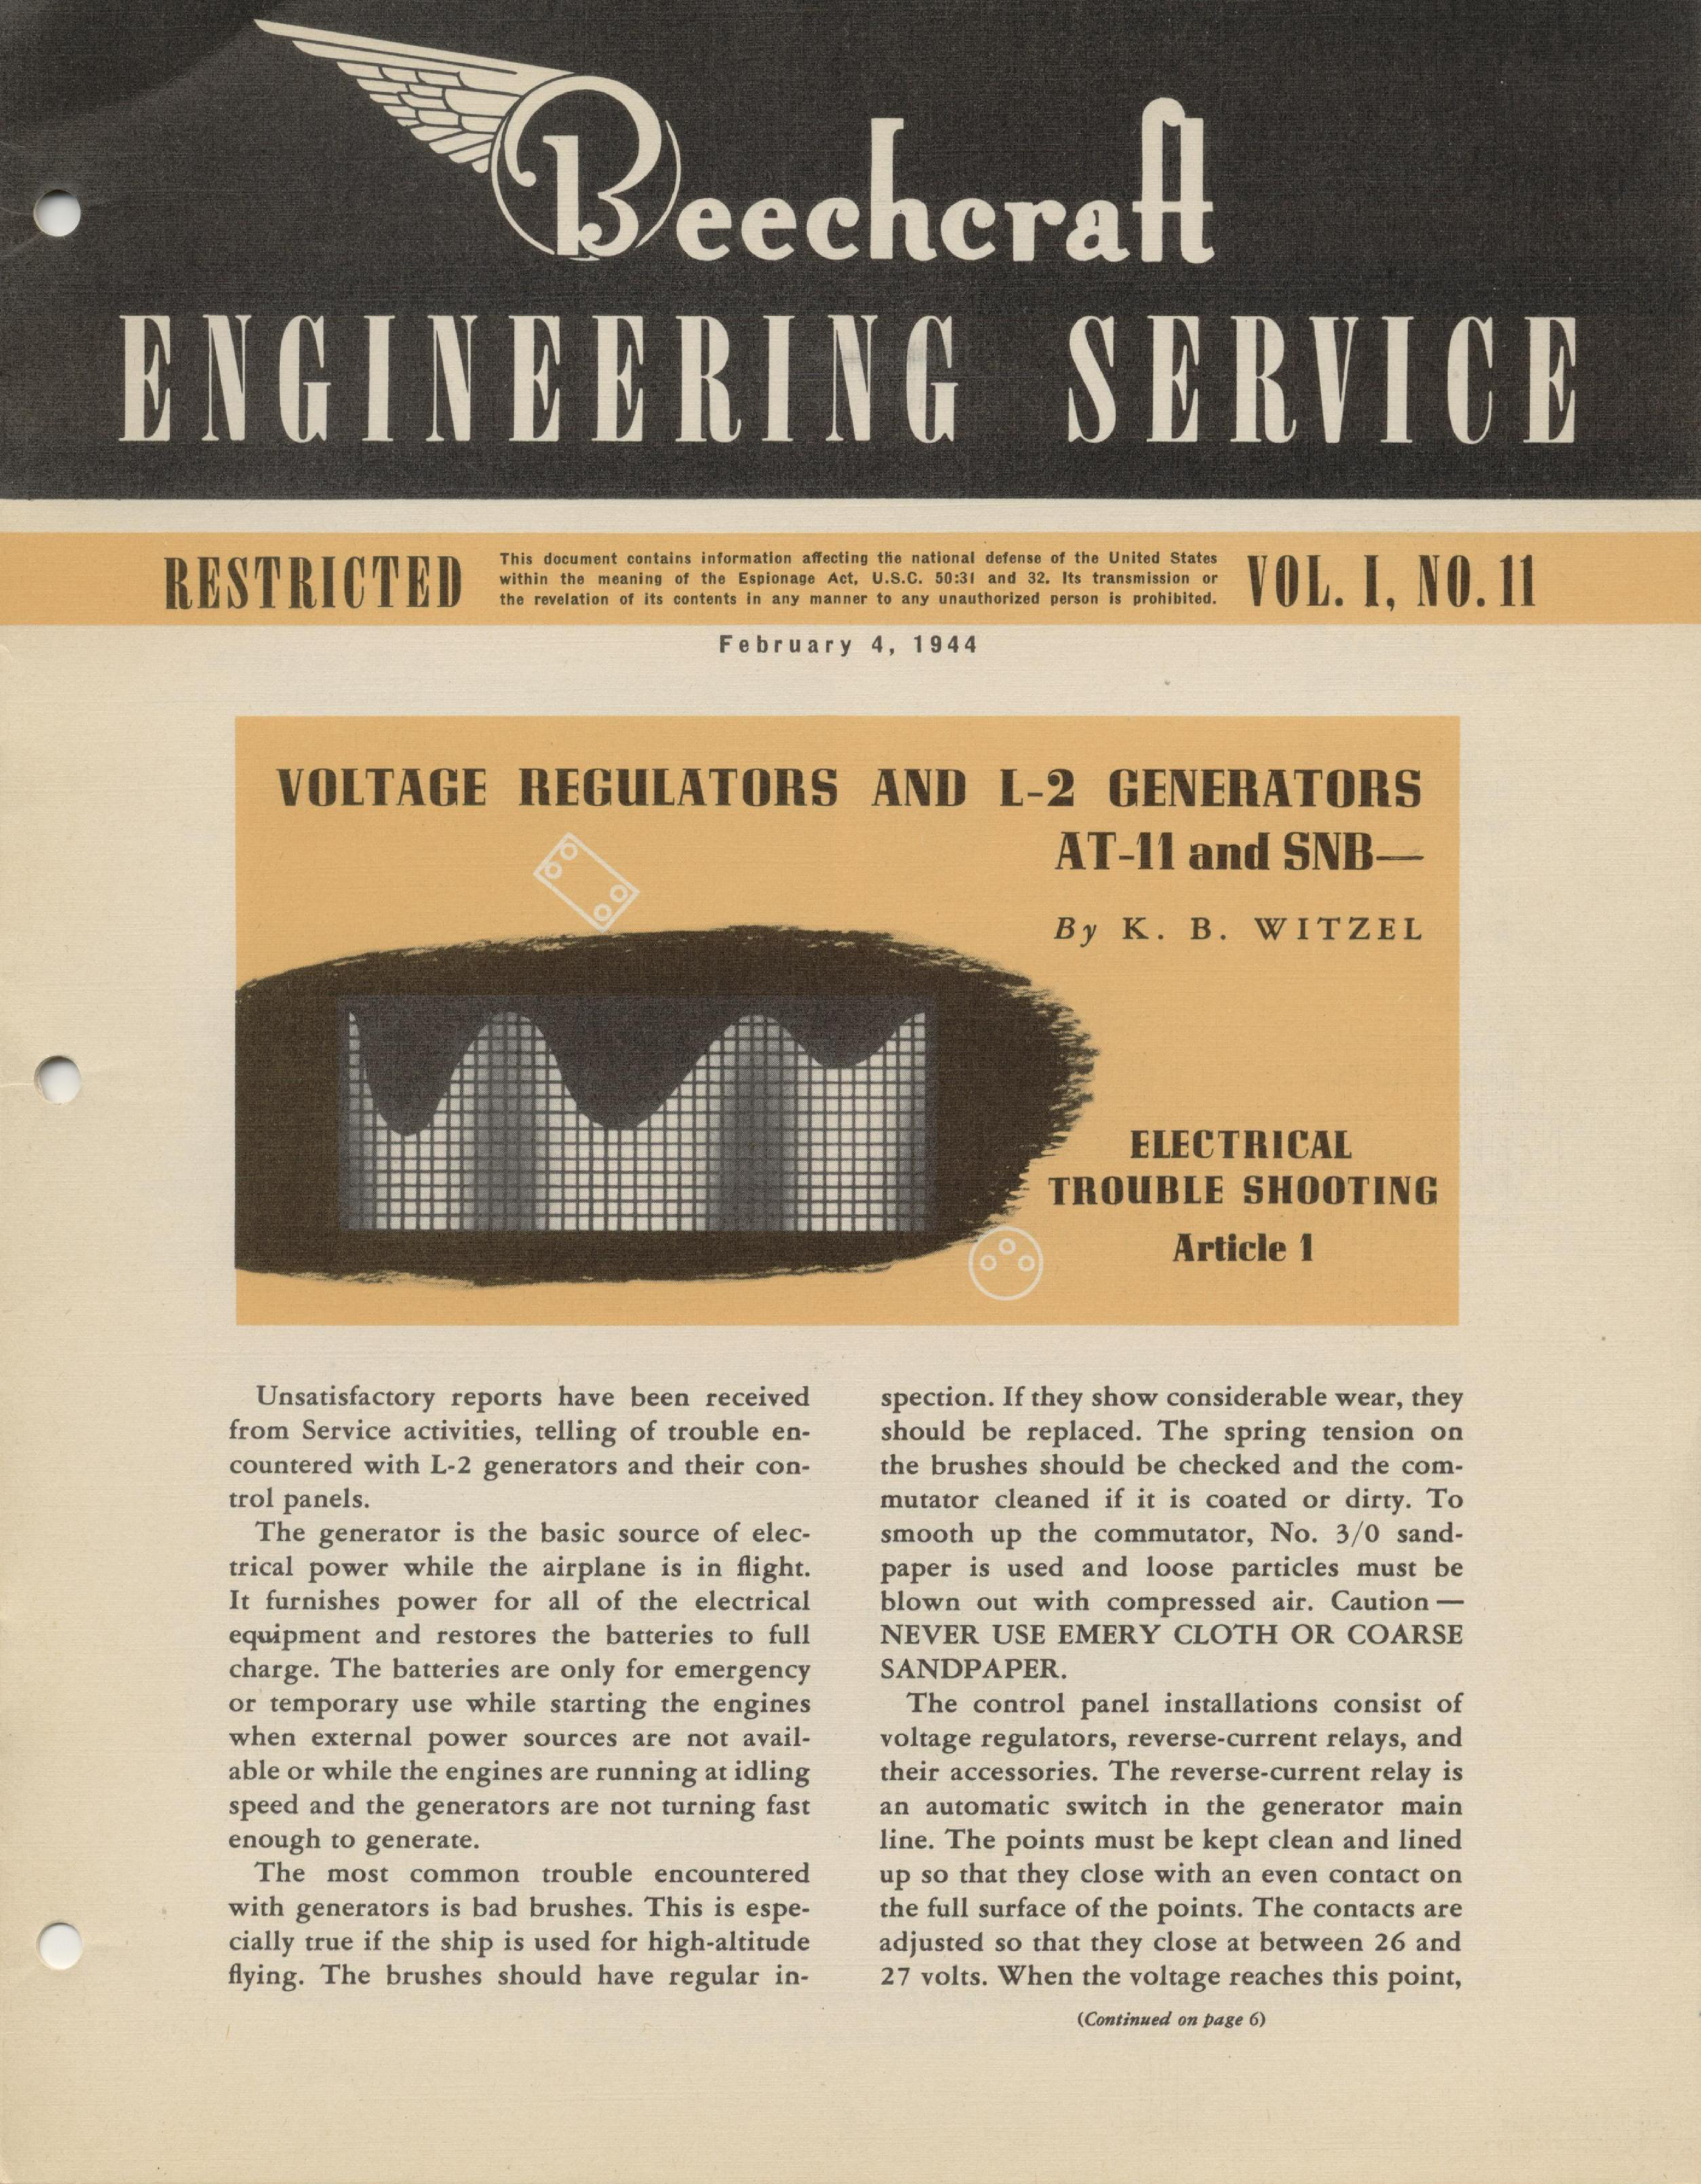 Sample page 1 from AirCorps Library document: Vol. I, No. 11 - Beechcraft Engineering Service